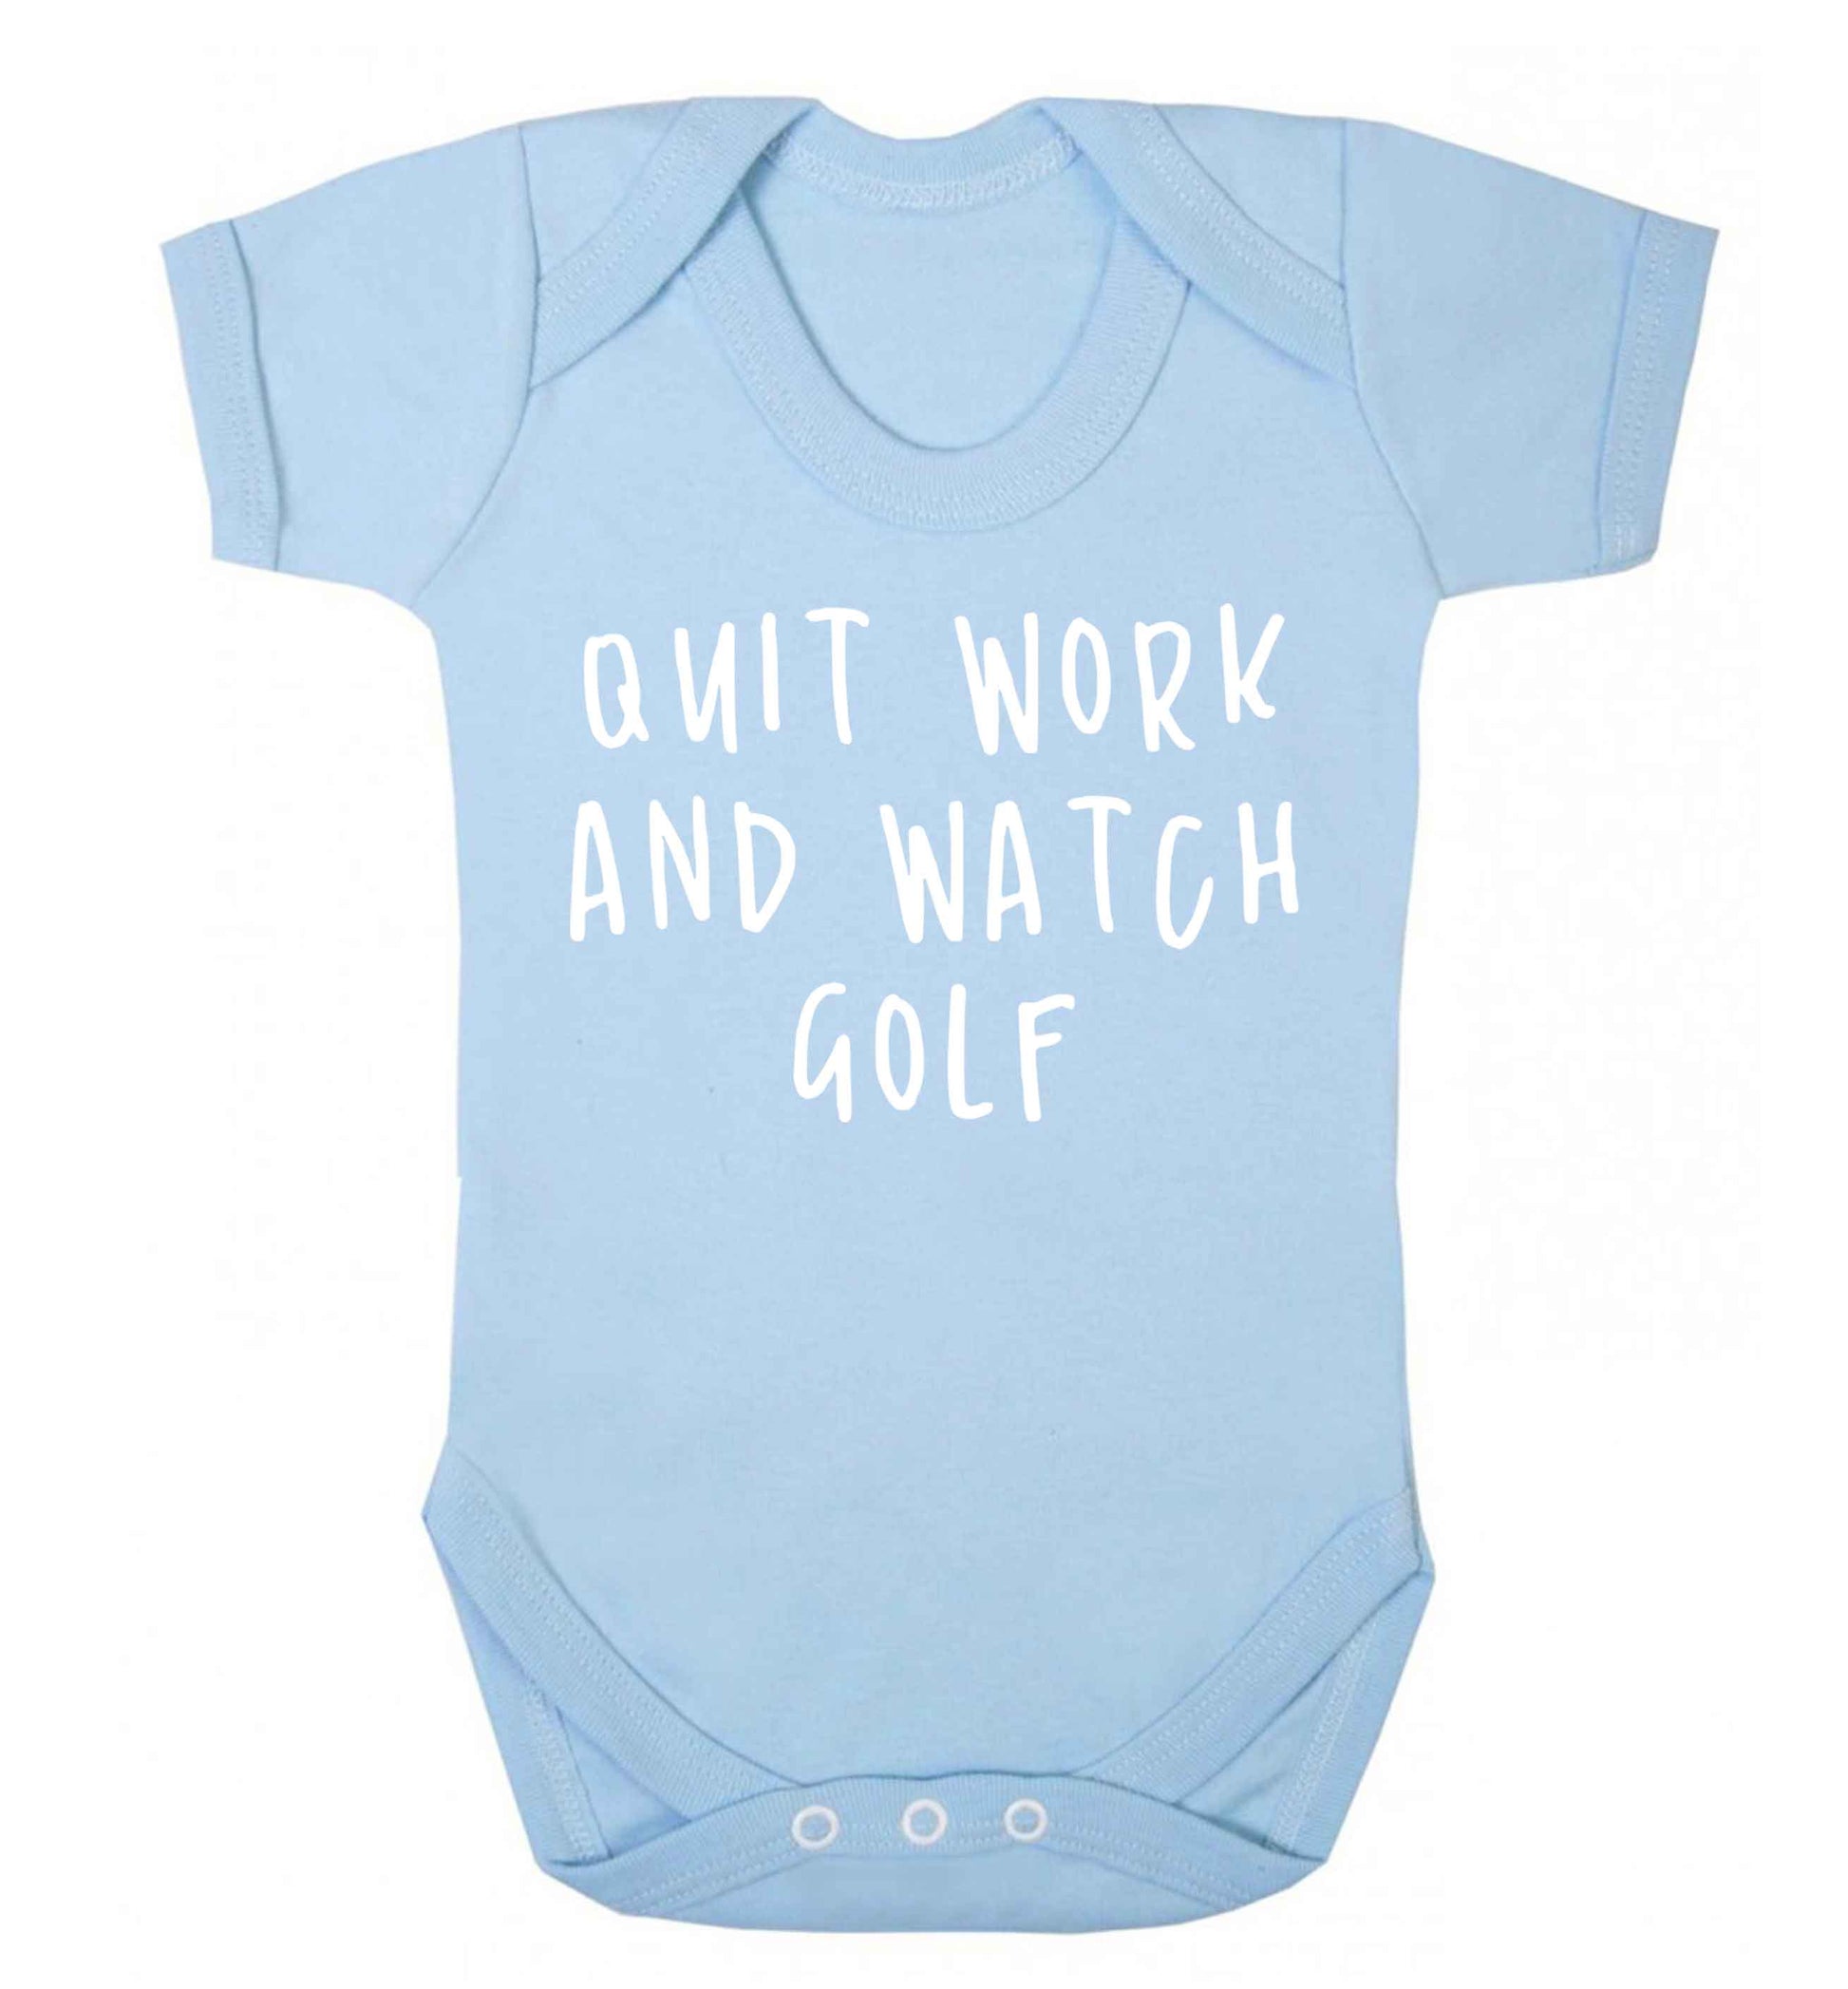 Quit work and watch golf Baby Vest pale blue 18-24 months